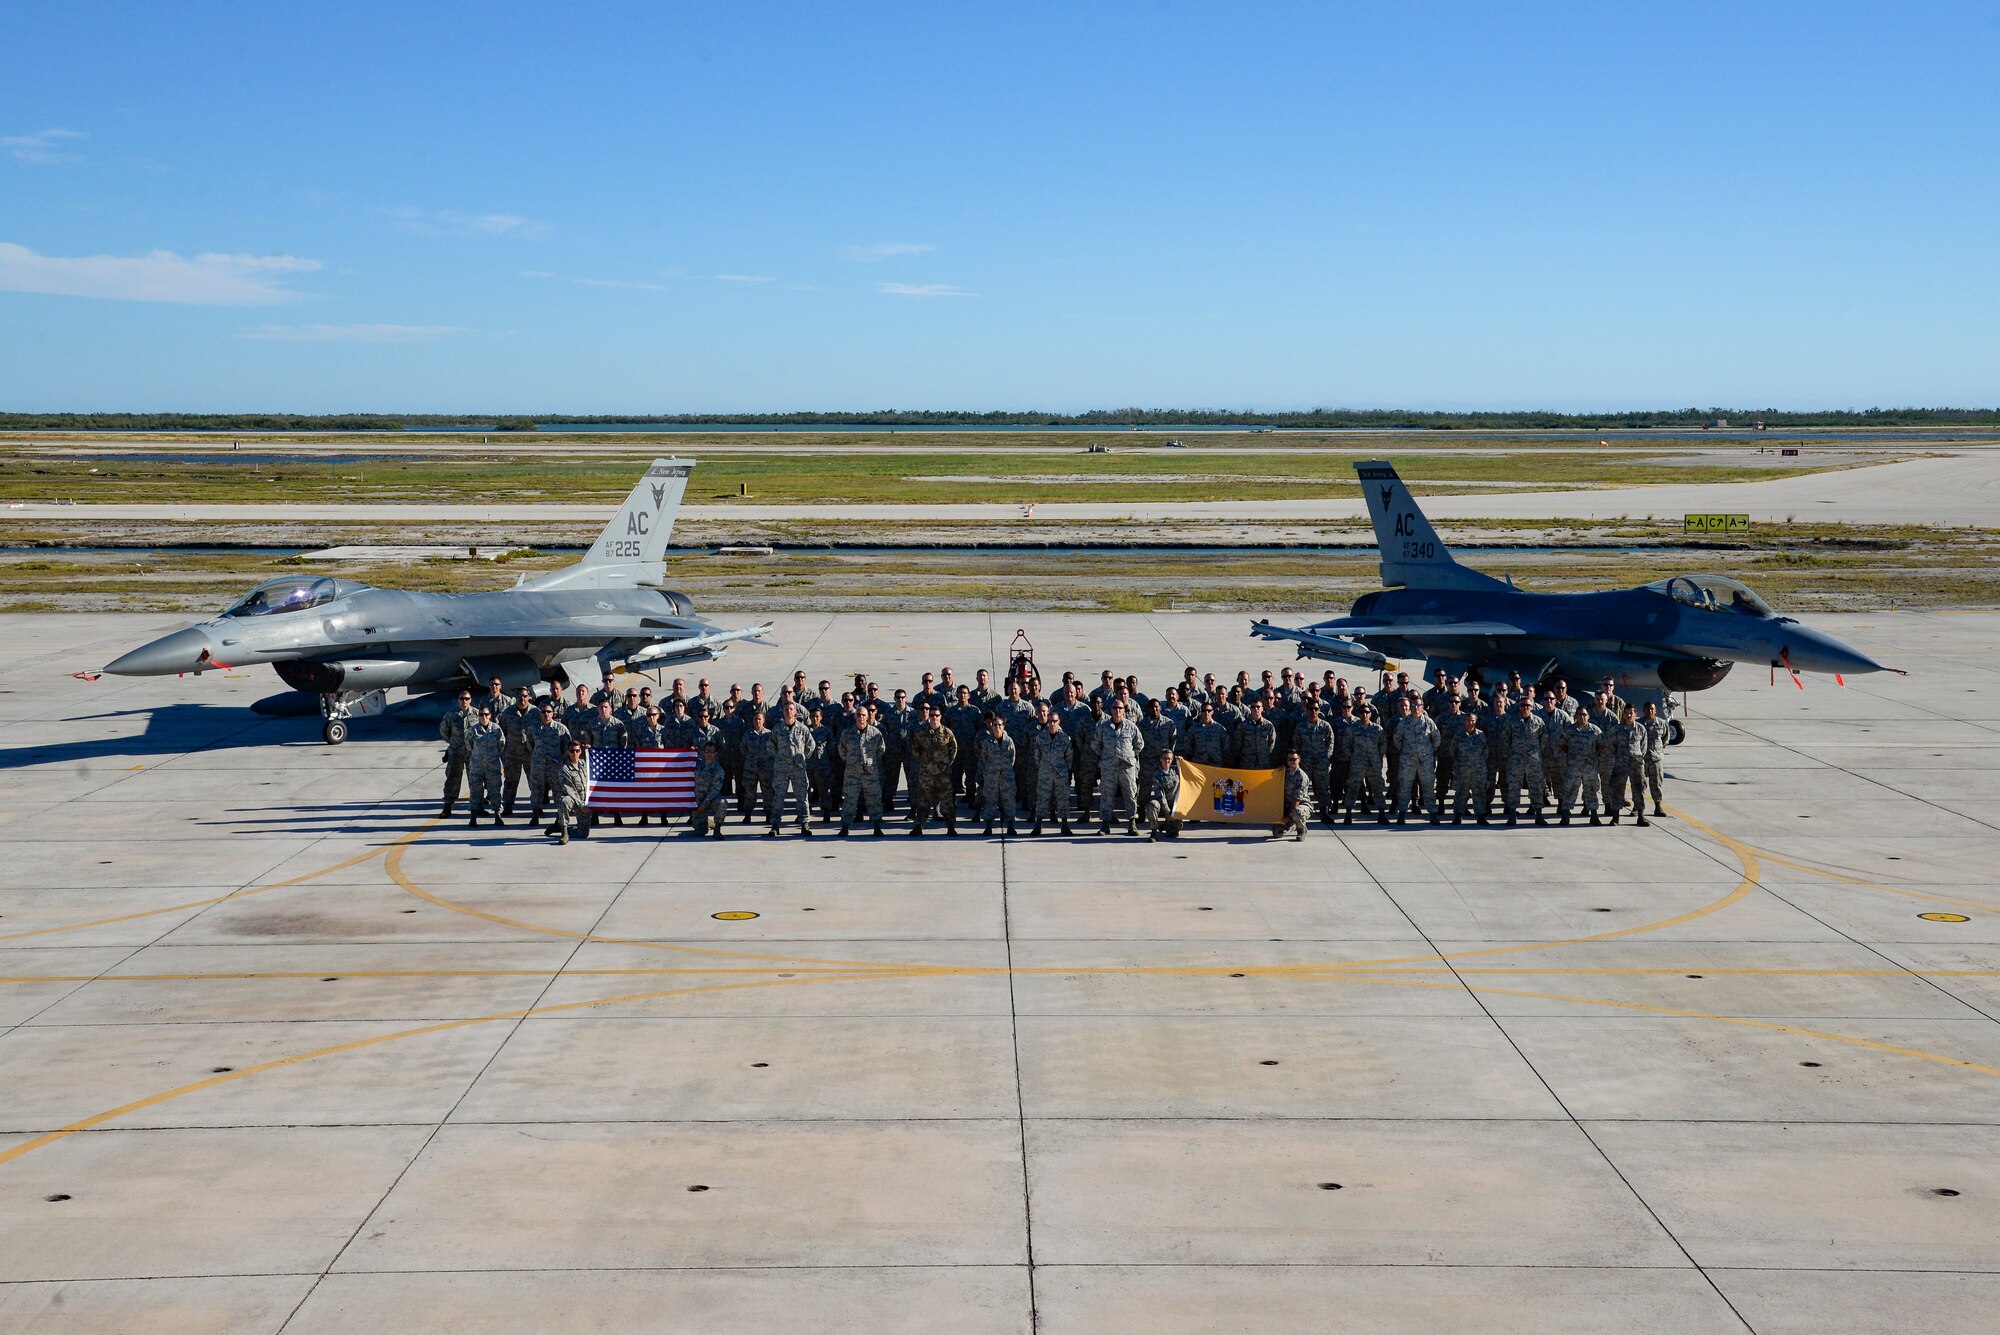 A photo of the 177th Maintenance group.